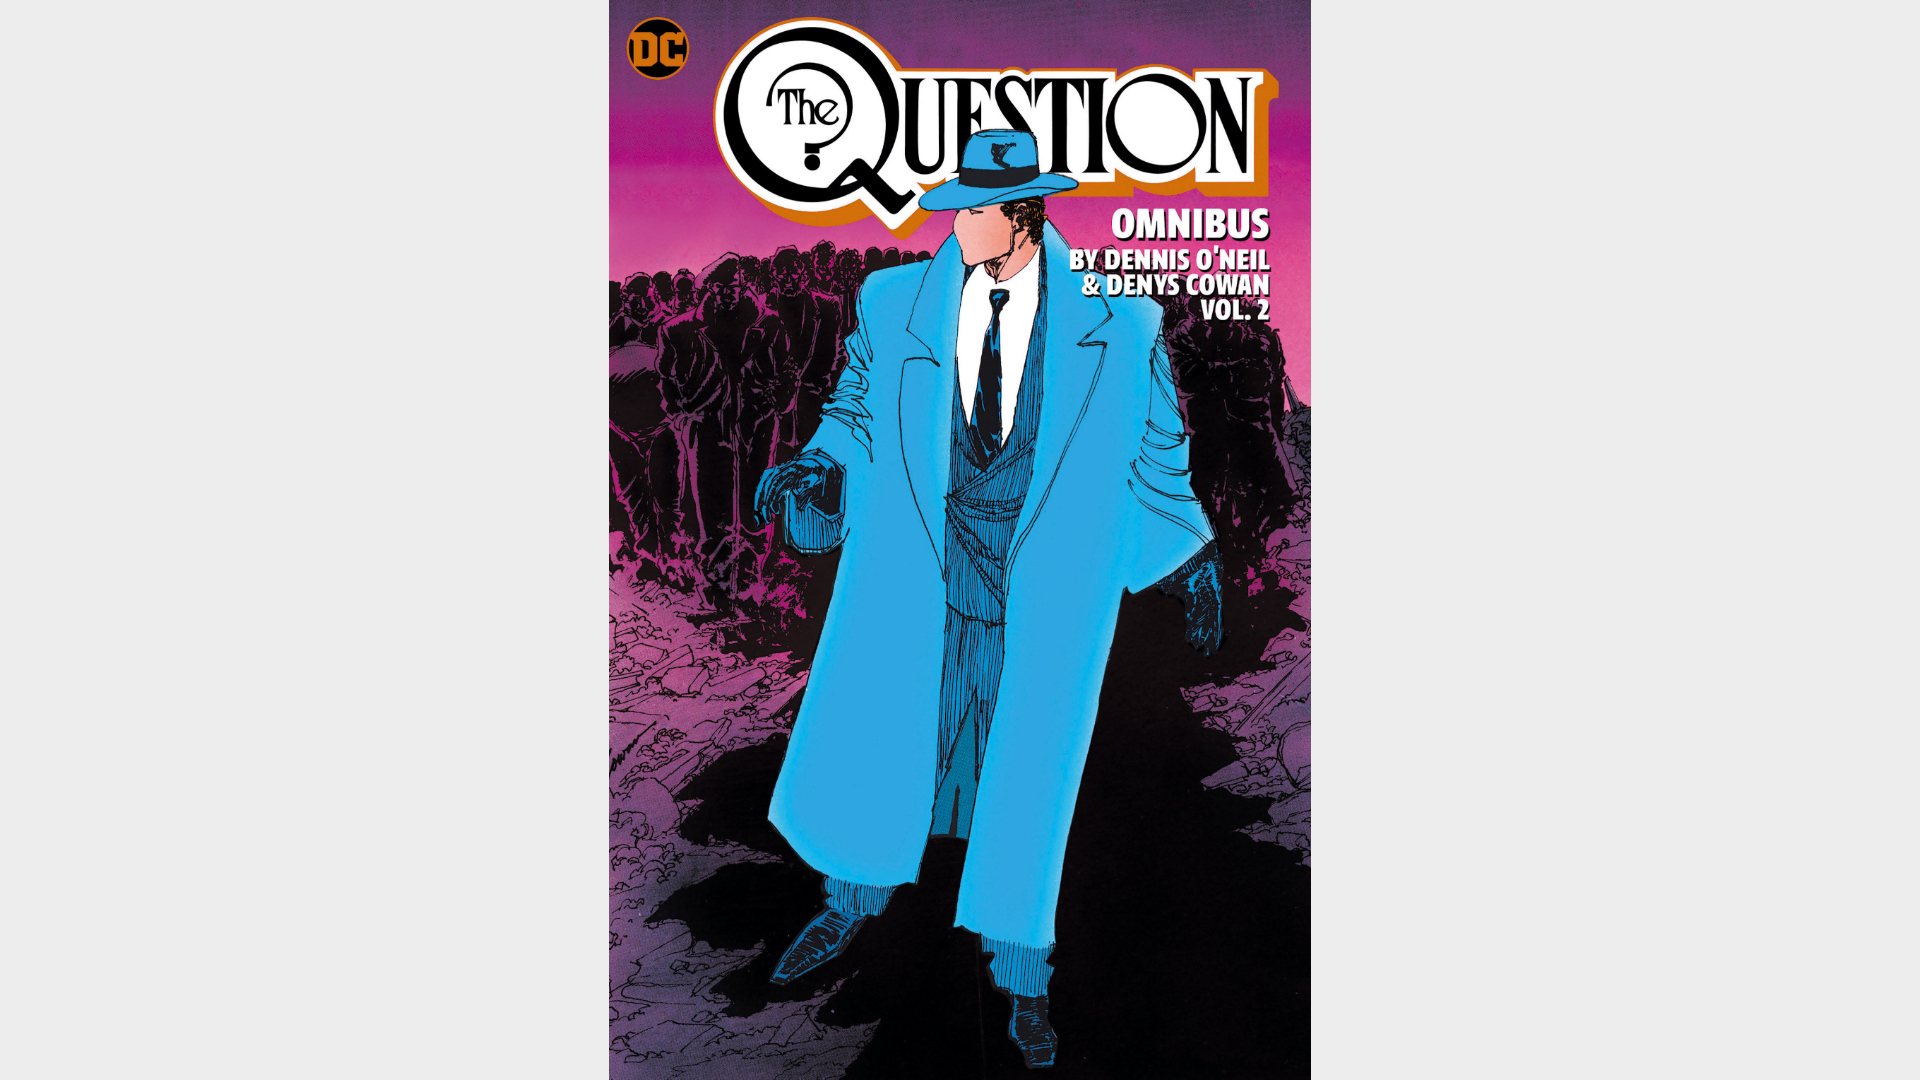 THE QUESTION OMNIBUS BY DENNIS O'NEIL AND DENYS COWAN VOL. 2